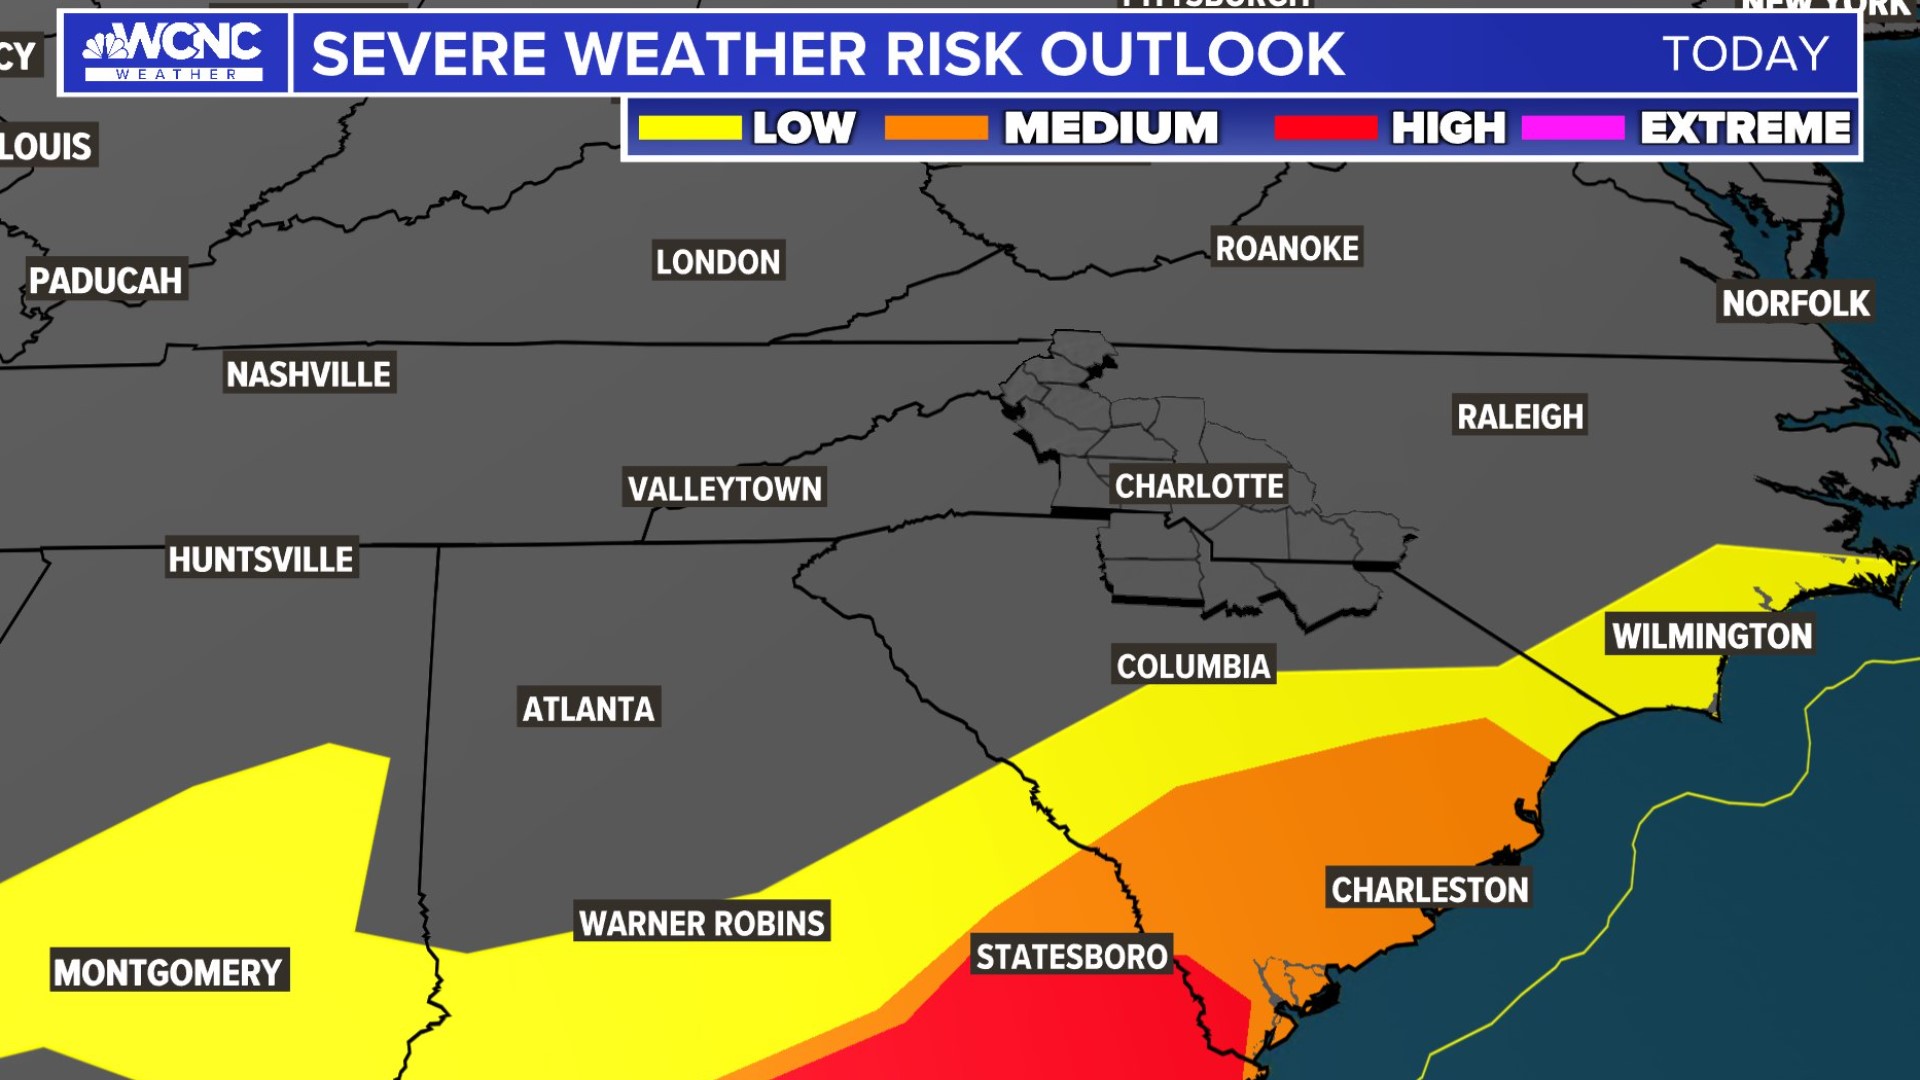 The overnight severe weather risk is going down, but not away. Brad Panovich explains the latest risk outlook to help you stay weather aware.